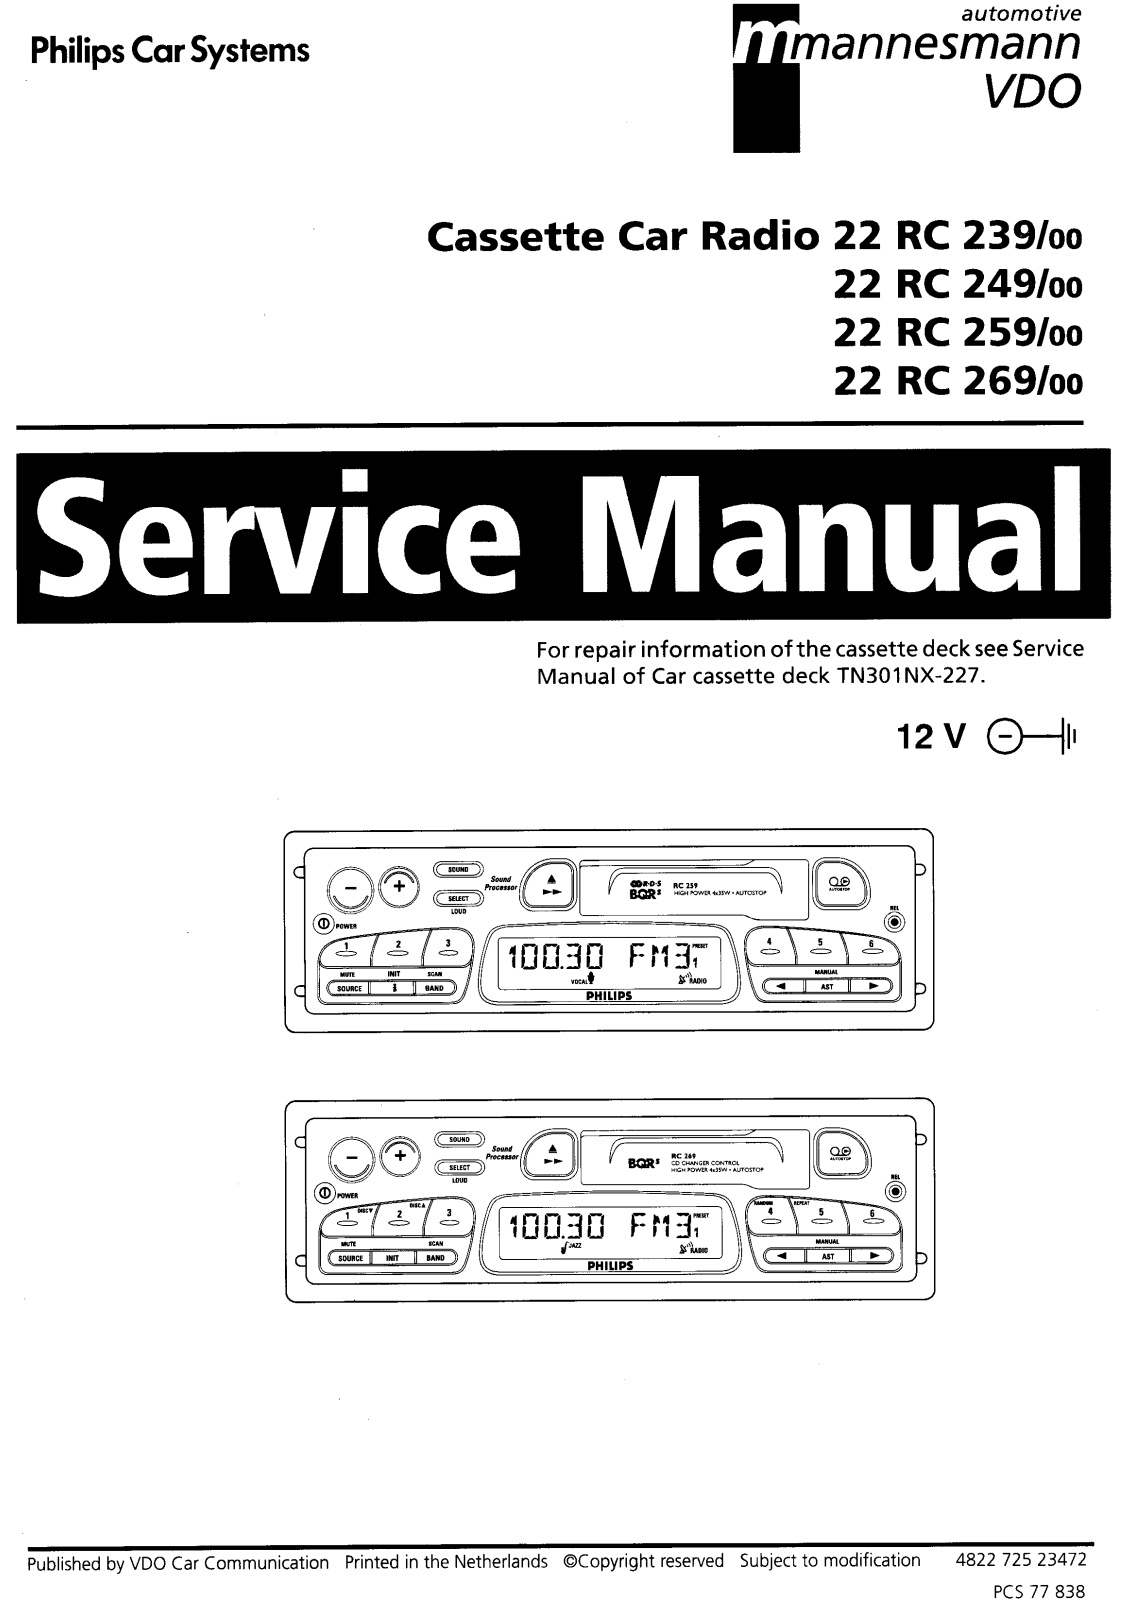 Philips 22-RC-269, 22-RC-249, 22-RC-239, 22-RC-259 Service Manual